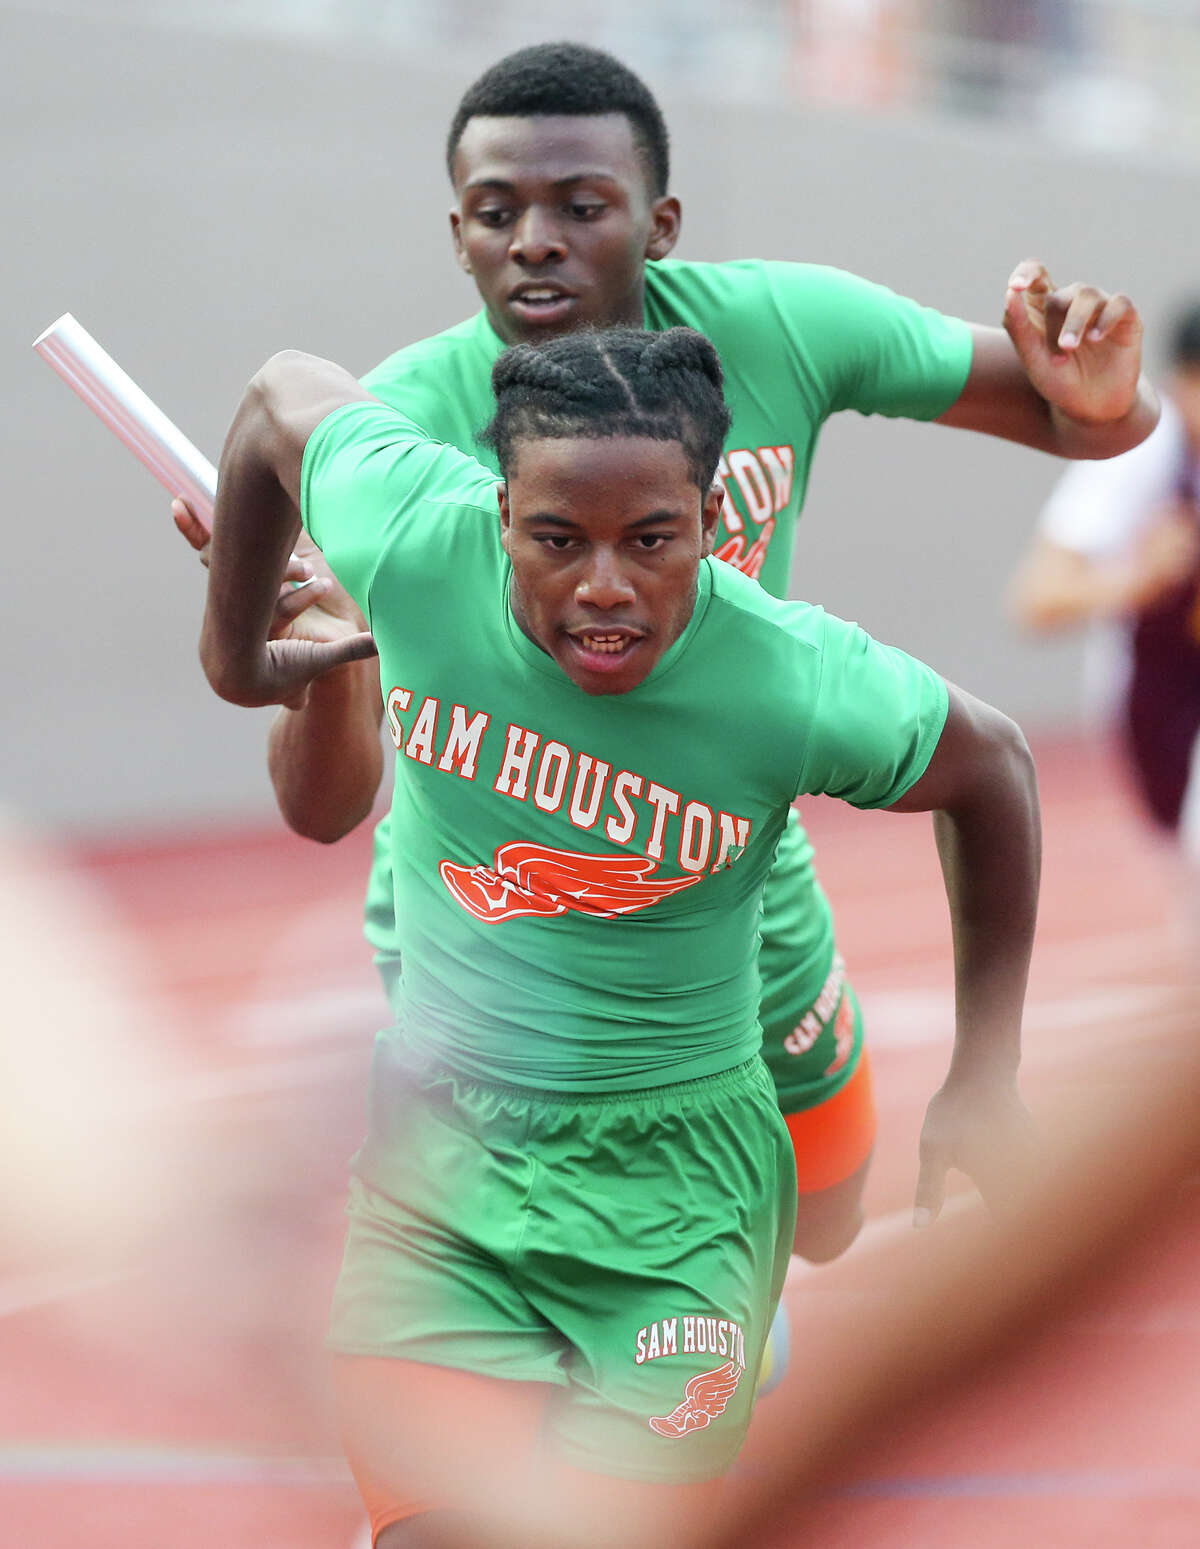 Sam Houston's Ka'Shiek Walker prepares to take the baton from Willie Debrow on the third leg of the 800-meter relay during the finals of the running events in the District 28-5A track and field meet at Alamo Stadium on Thursday, April 16, 2015. Sam Houston won the event with a time of 1 minute, 32.63 seconds. MARVIN PFEIFFER/ mpfeiffer@express-news.net